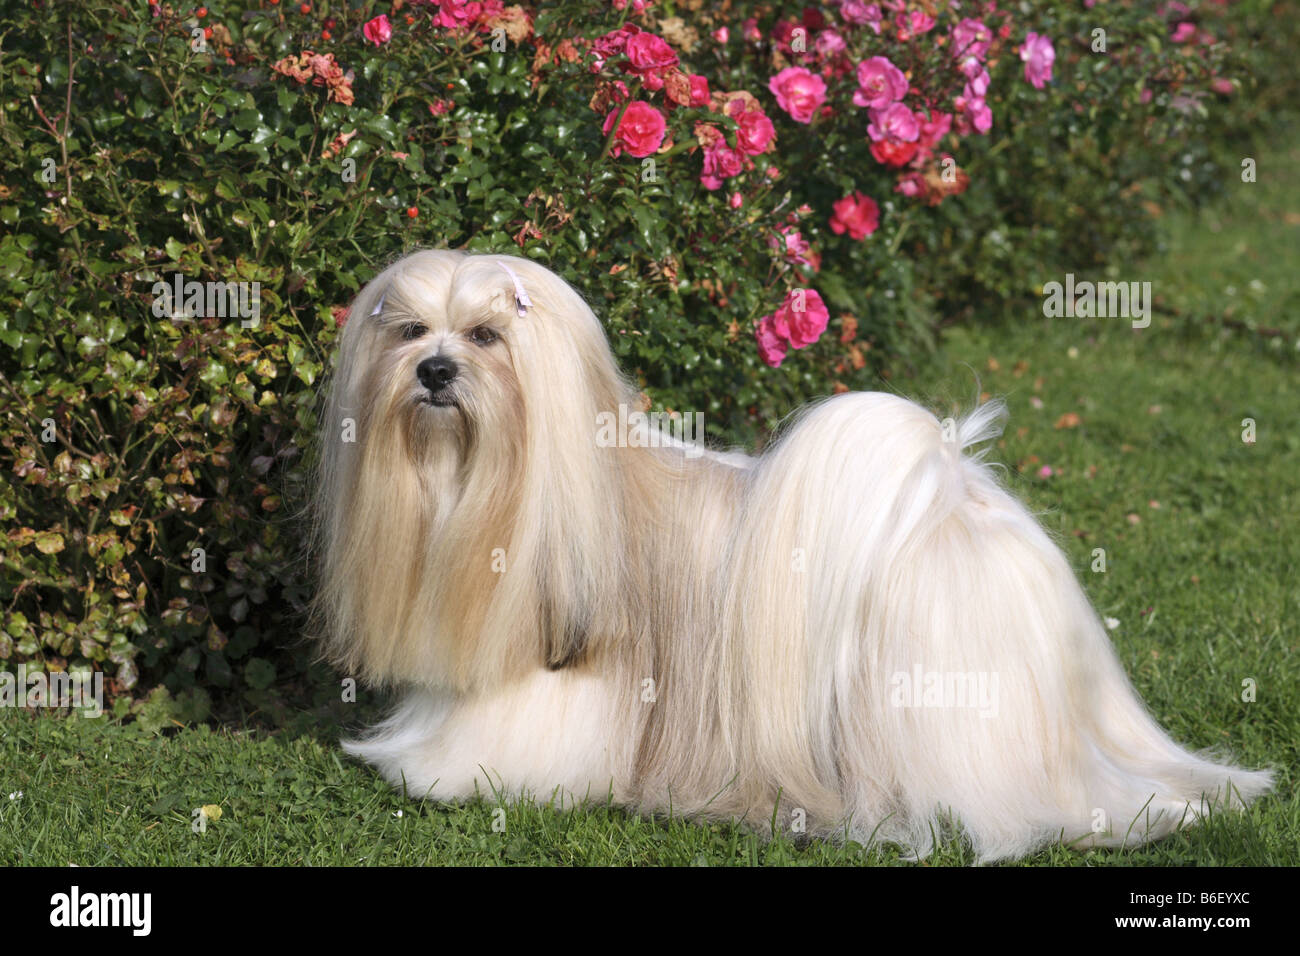 Lhasa Apso (Canis lupus f. familiaris), standing in lawn Stock Photo